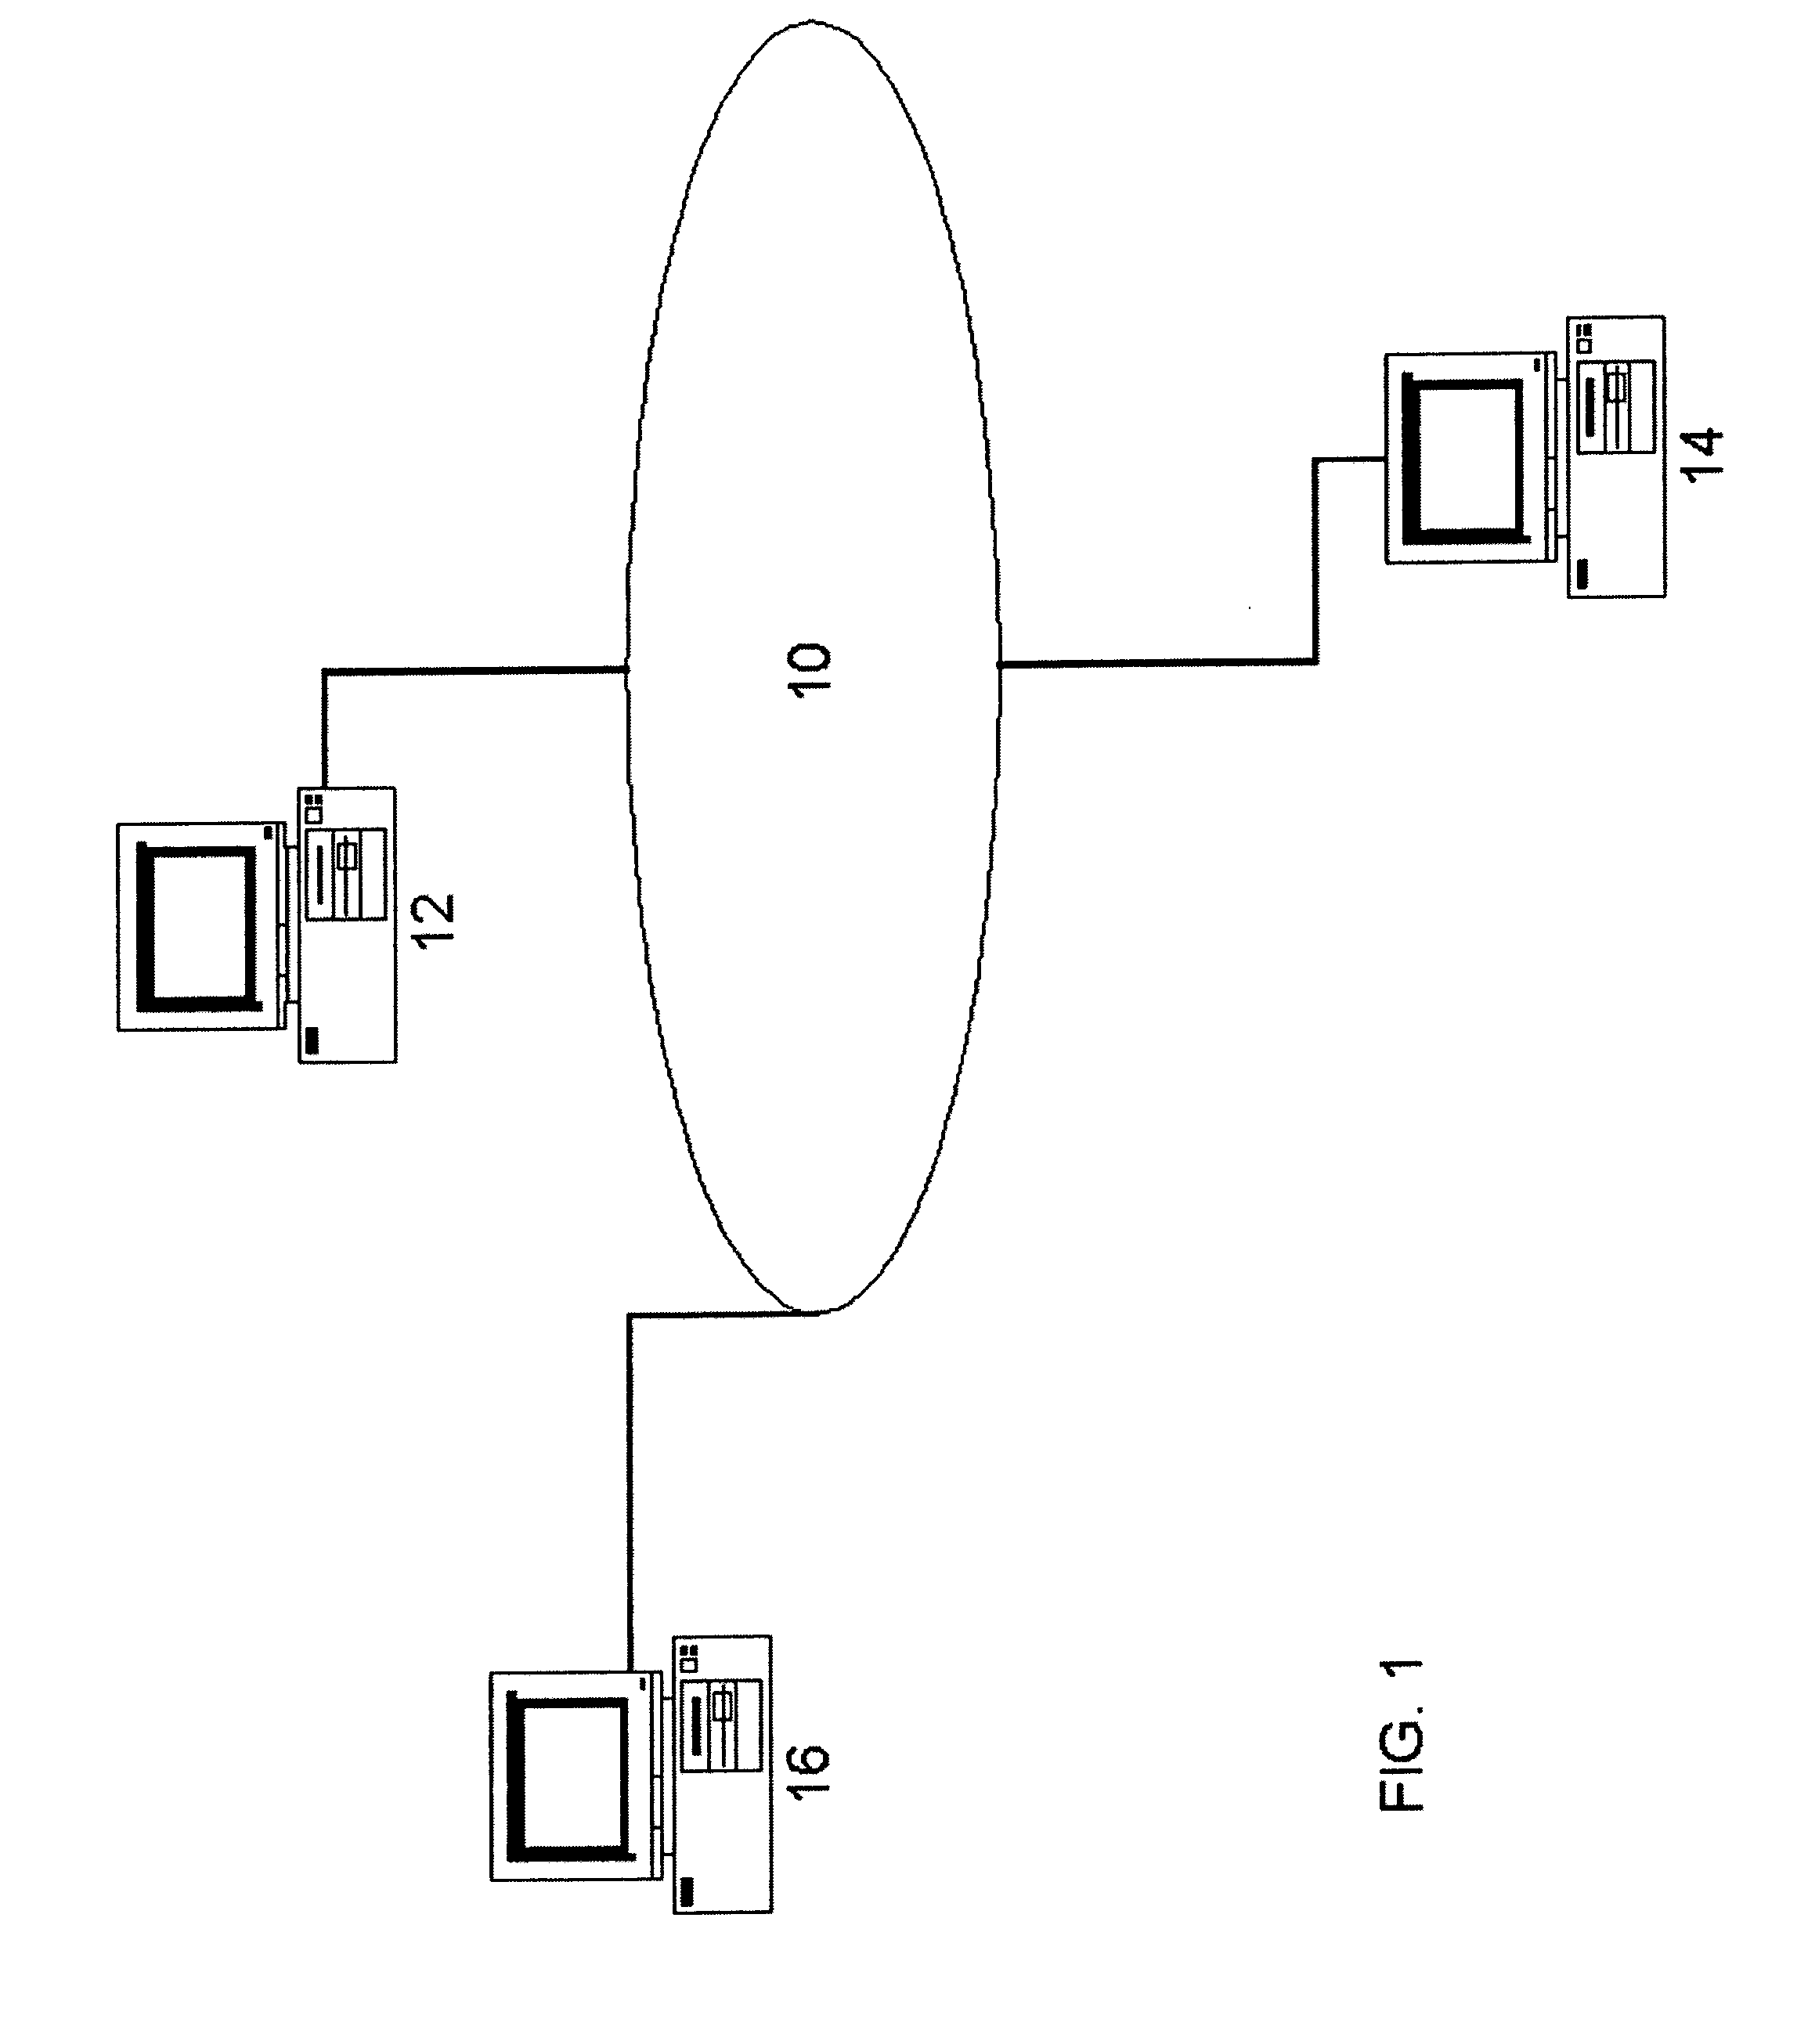 Method and computer product for identifying and selecting potential e-mail reply recipients from a multi-party e-mail